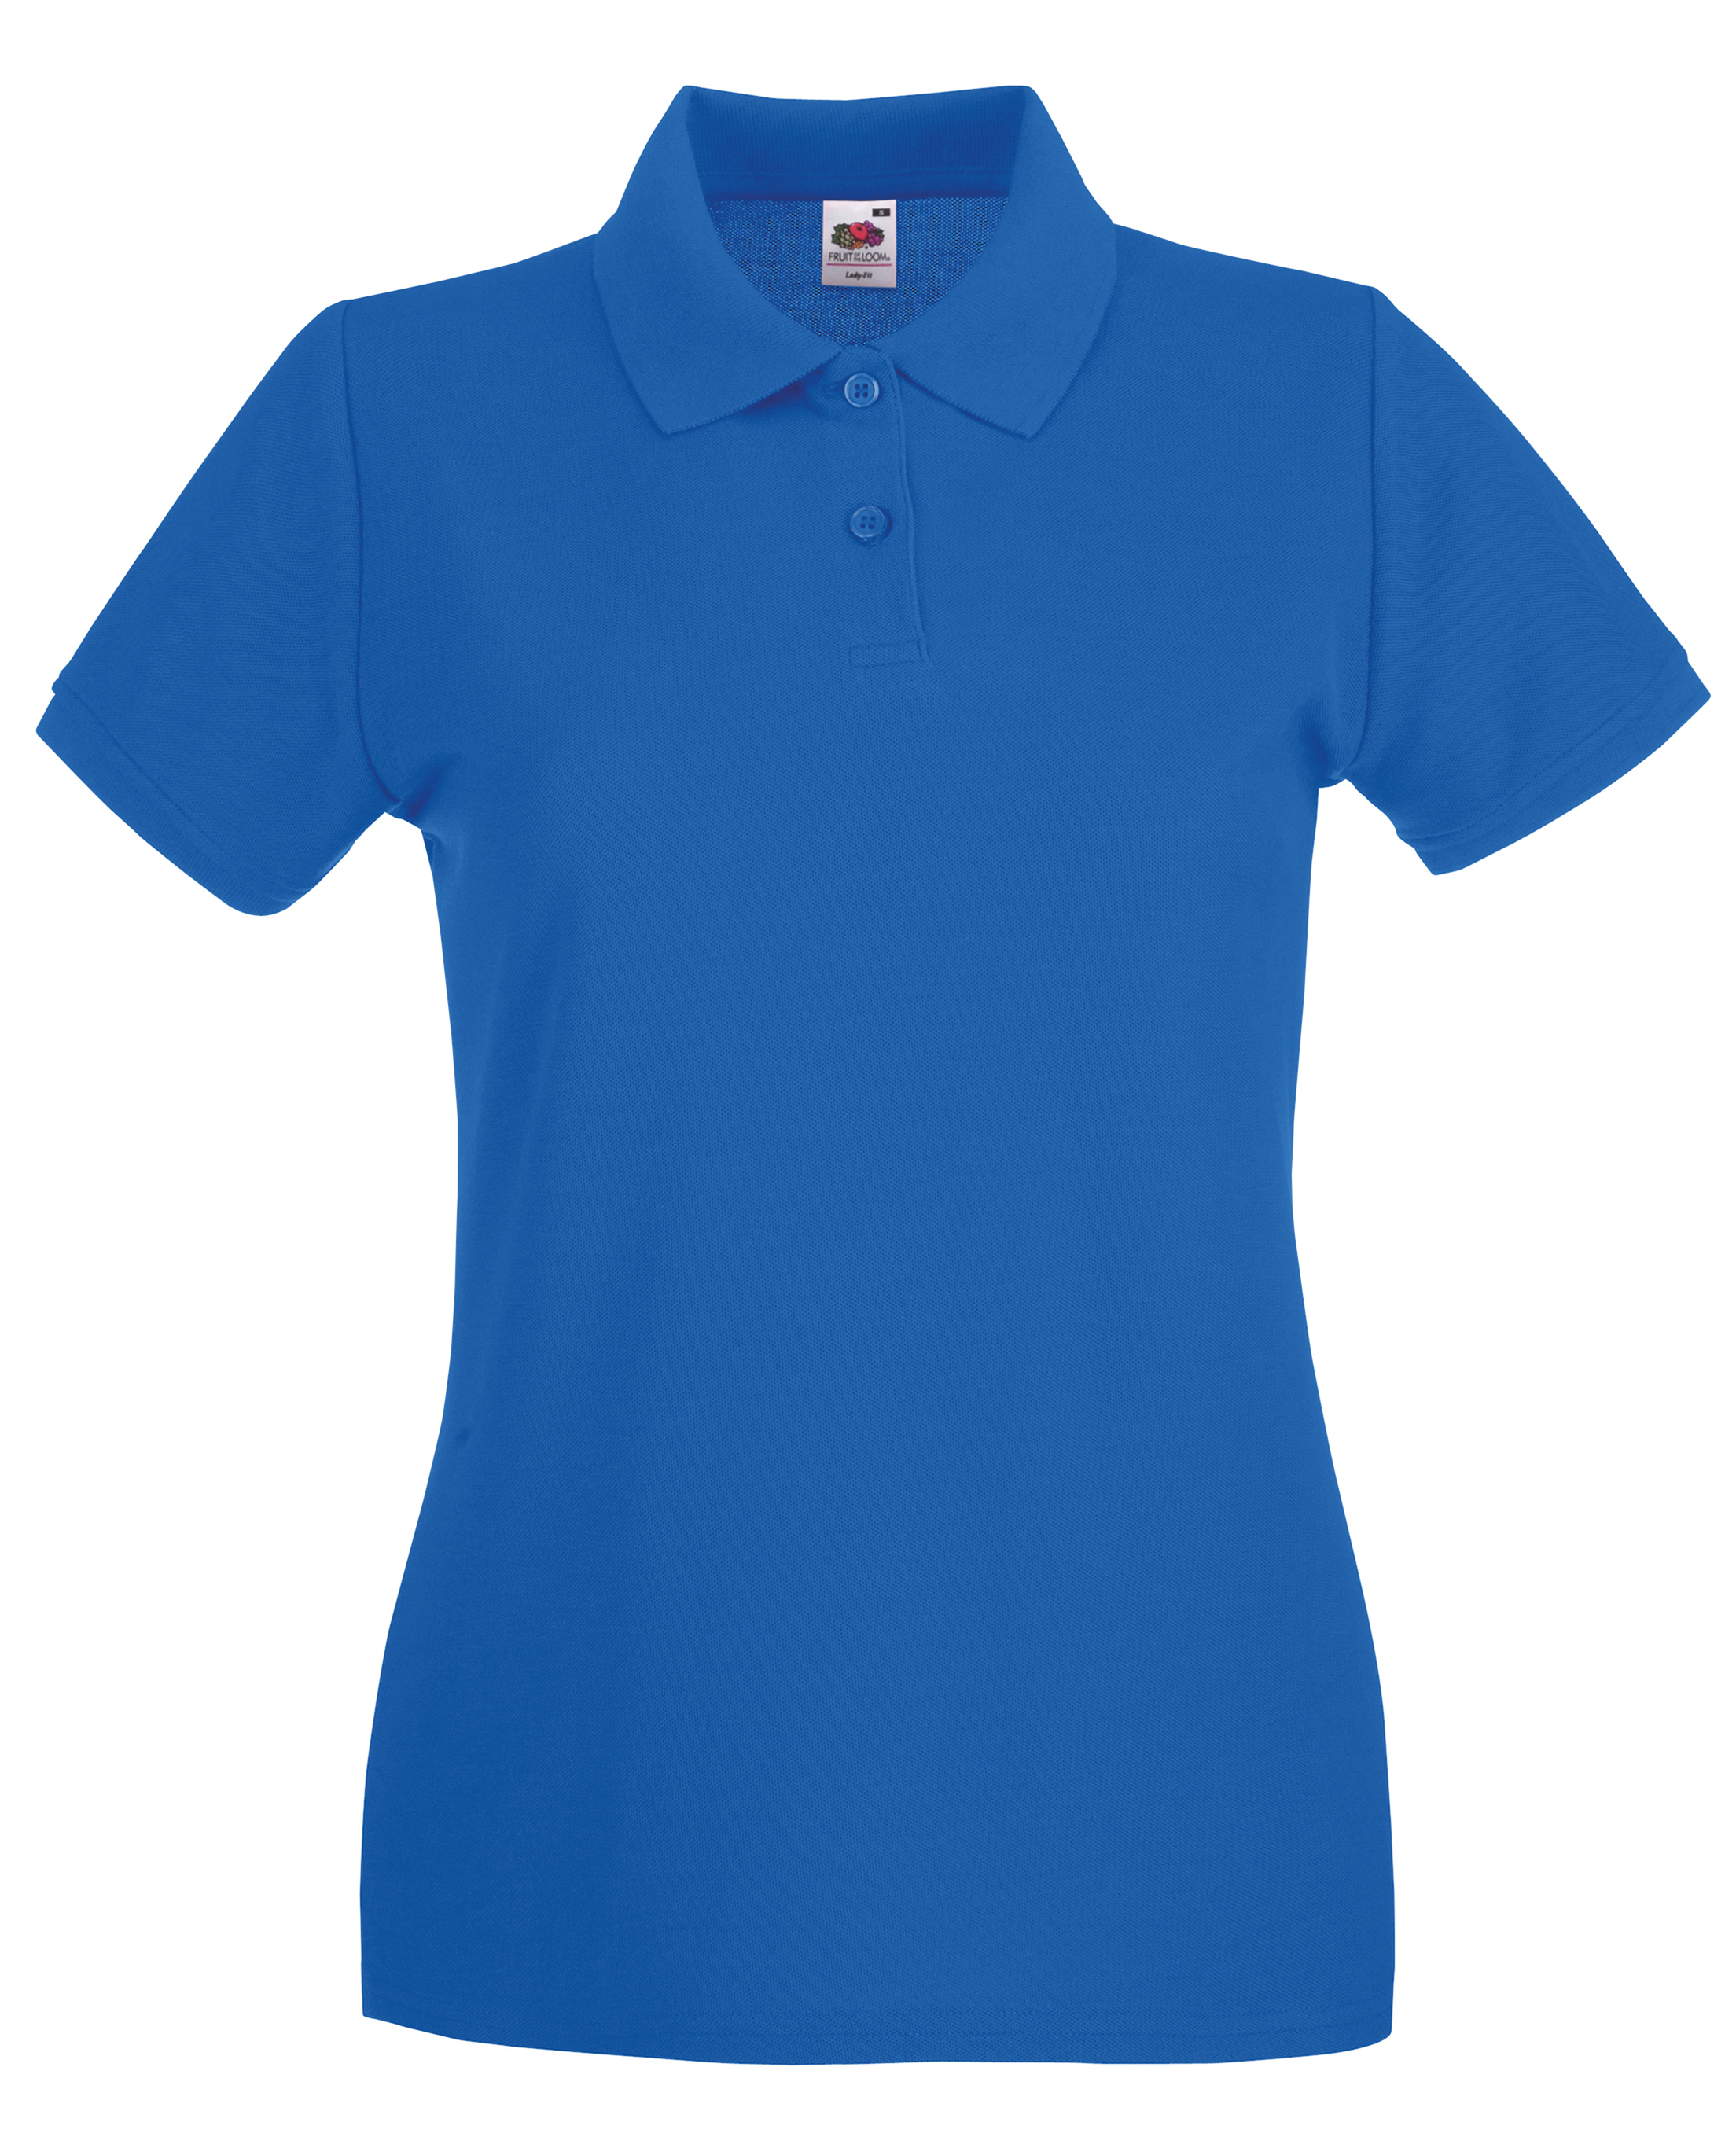 ax-httpswebsystems.s3.amazonaws.comtmp_for_downloadfruit-of-the-loom-womens-premium-royal-blue.jpg